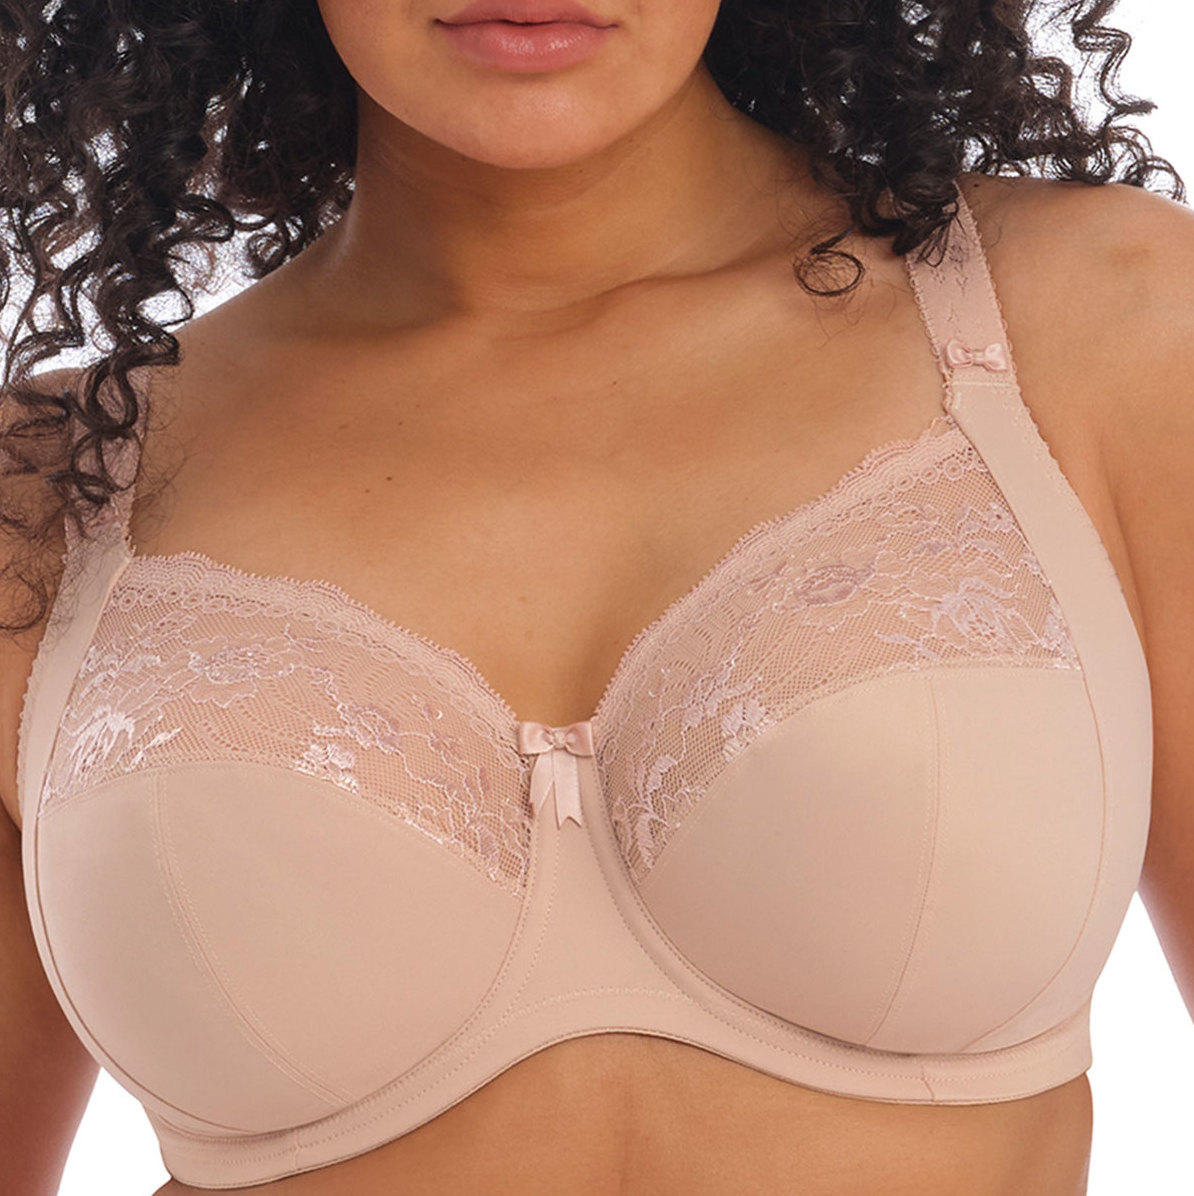 Bra Fittings  Shop with a friend and each save $20 – She Science